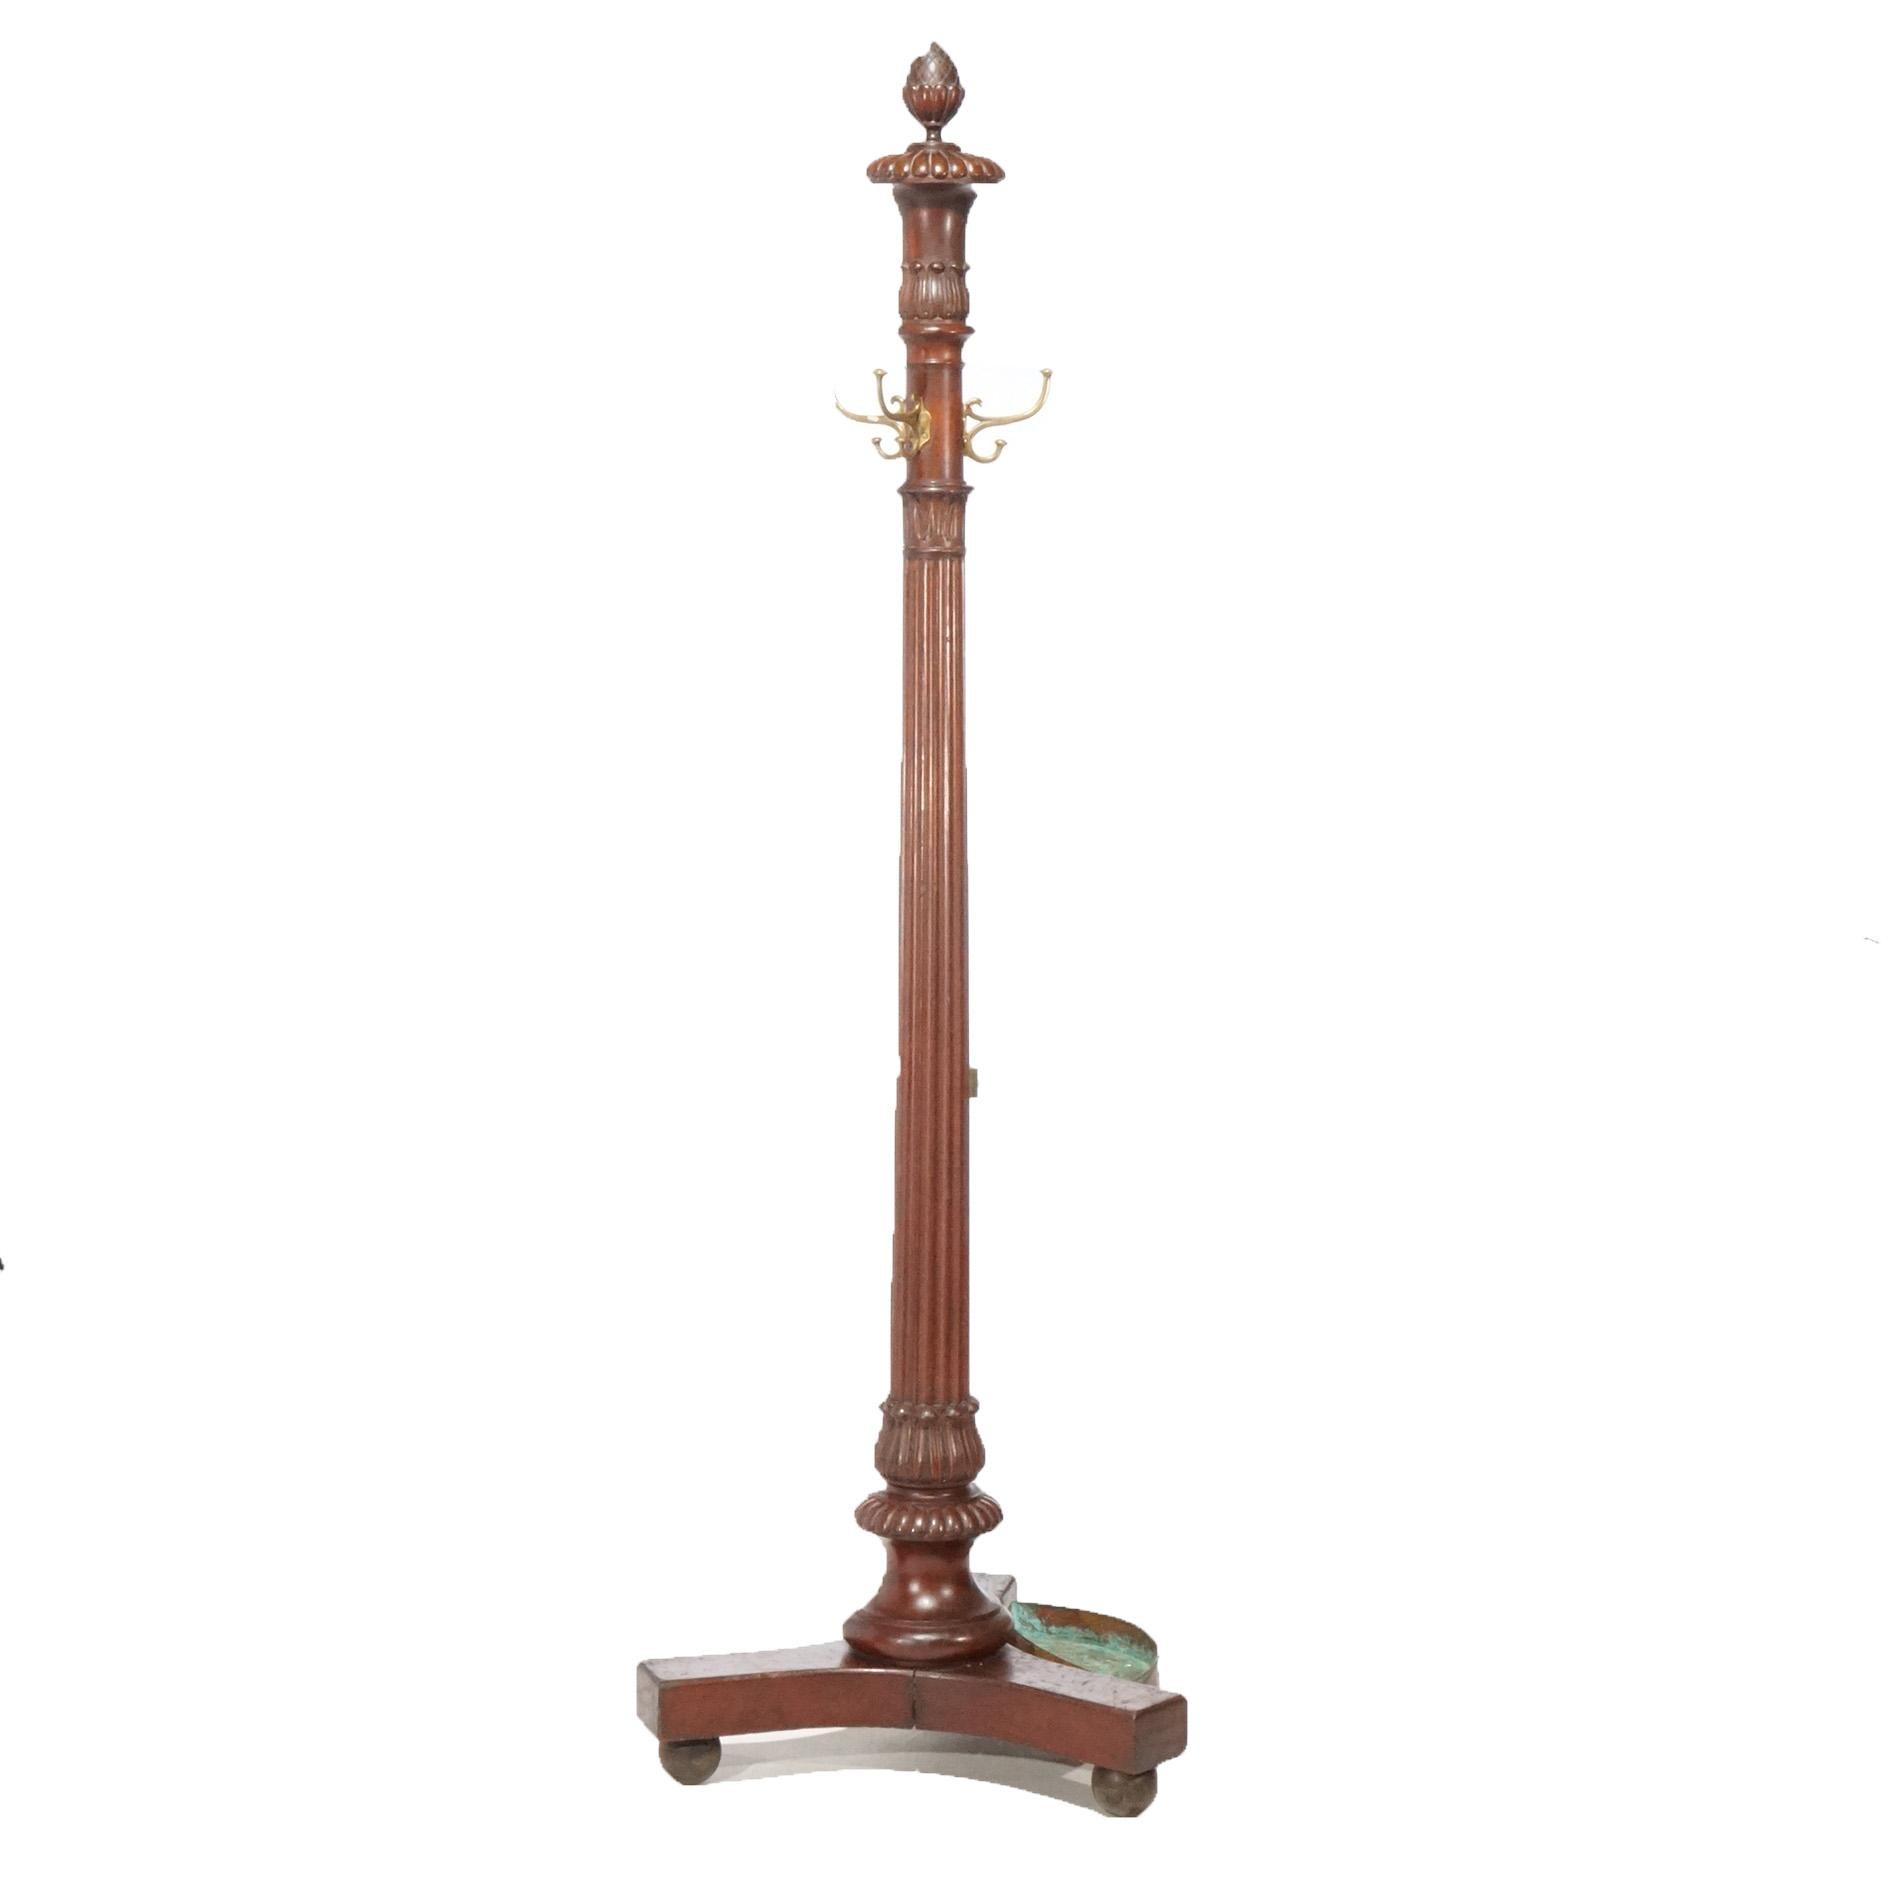 An antique hat rack in the manner of RJ Horner offers mahogany construction with carved foliate elements, reeded column, and tripod footed base with umbrella drop tray, circa 1900

Measures- 77.5''H x 24.75''W x 24.75''D.